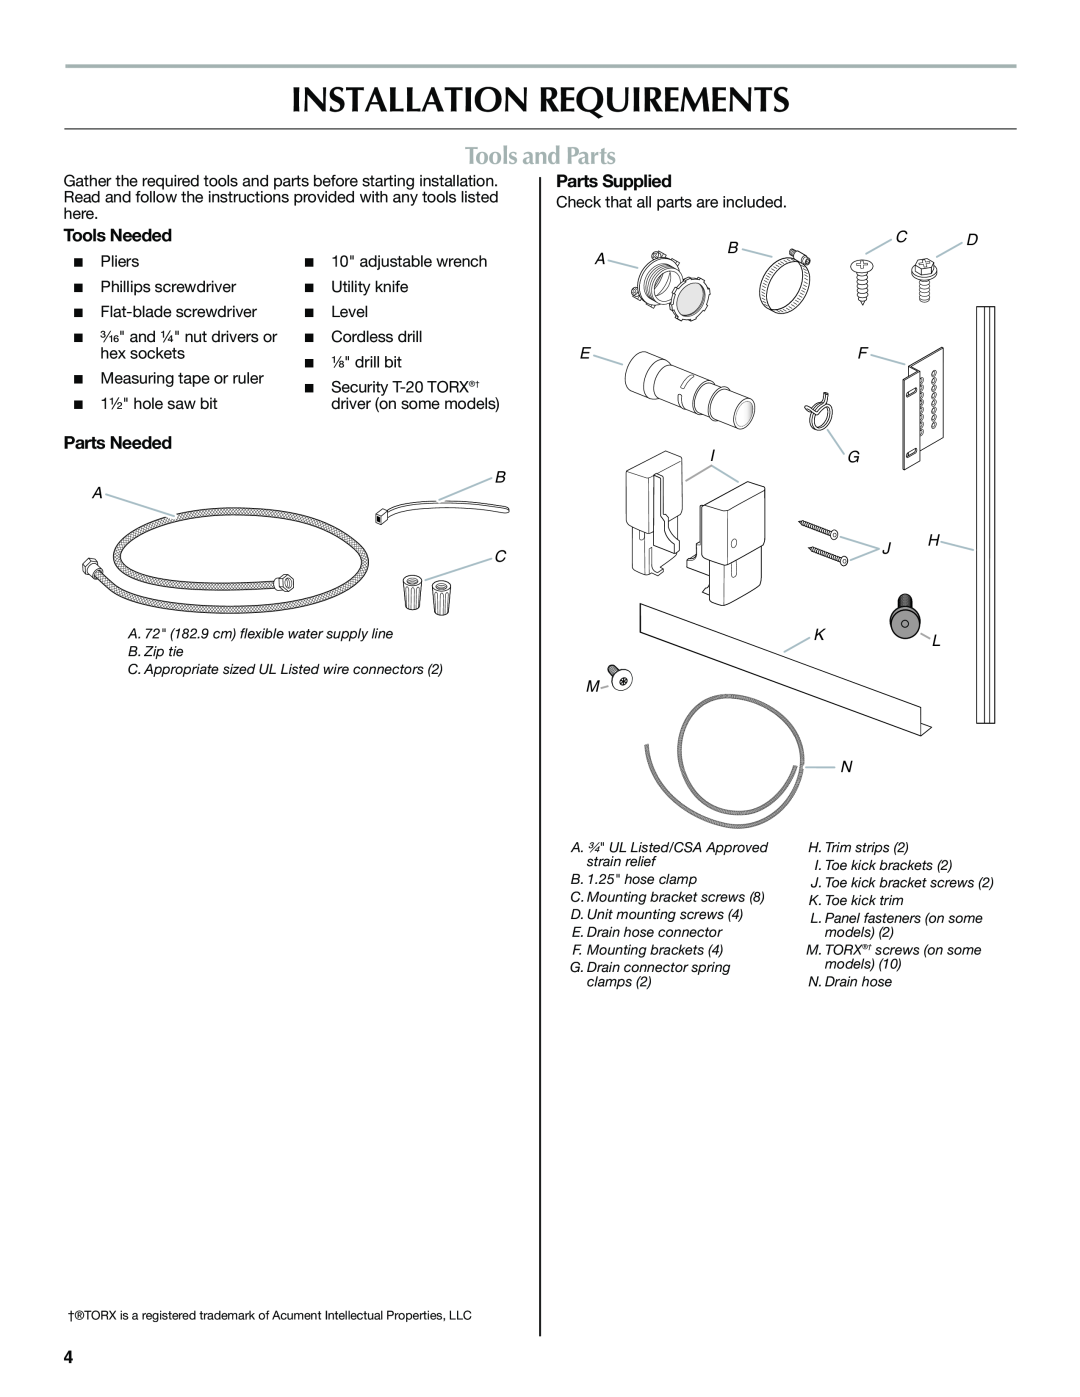 Maytag W10300218B Installation Requirements, Tools and Parts, Parts Supplied, Tools Needed, Parts Needed, Bc D, B A C 